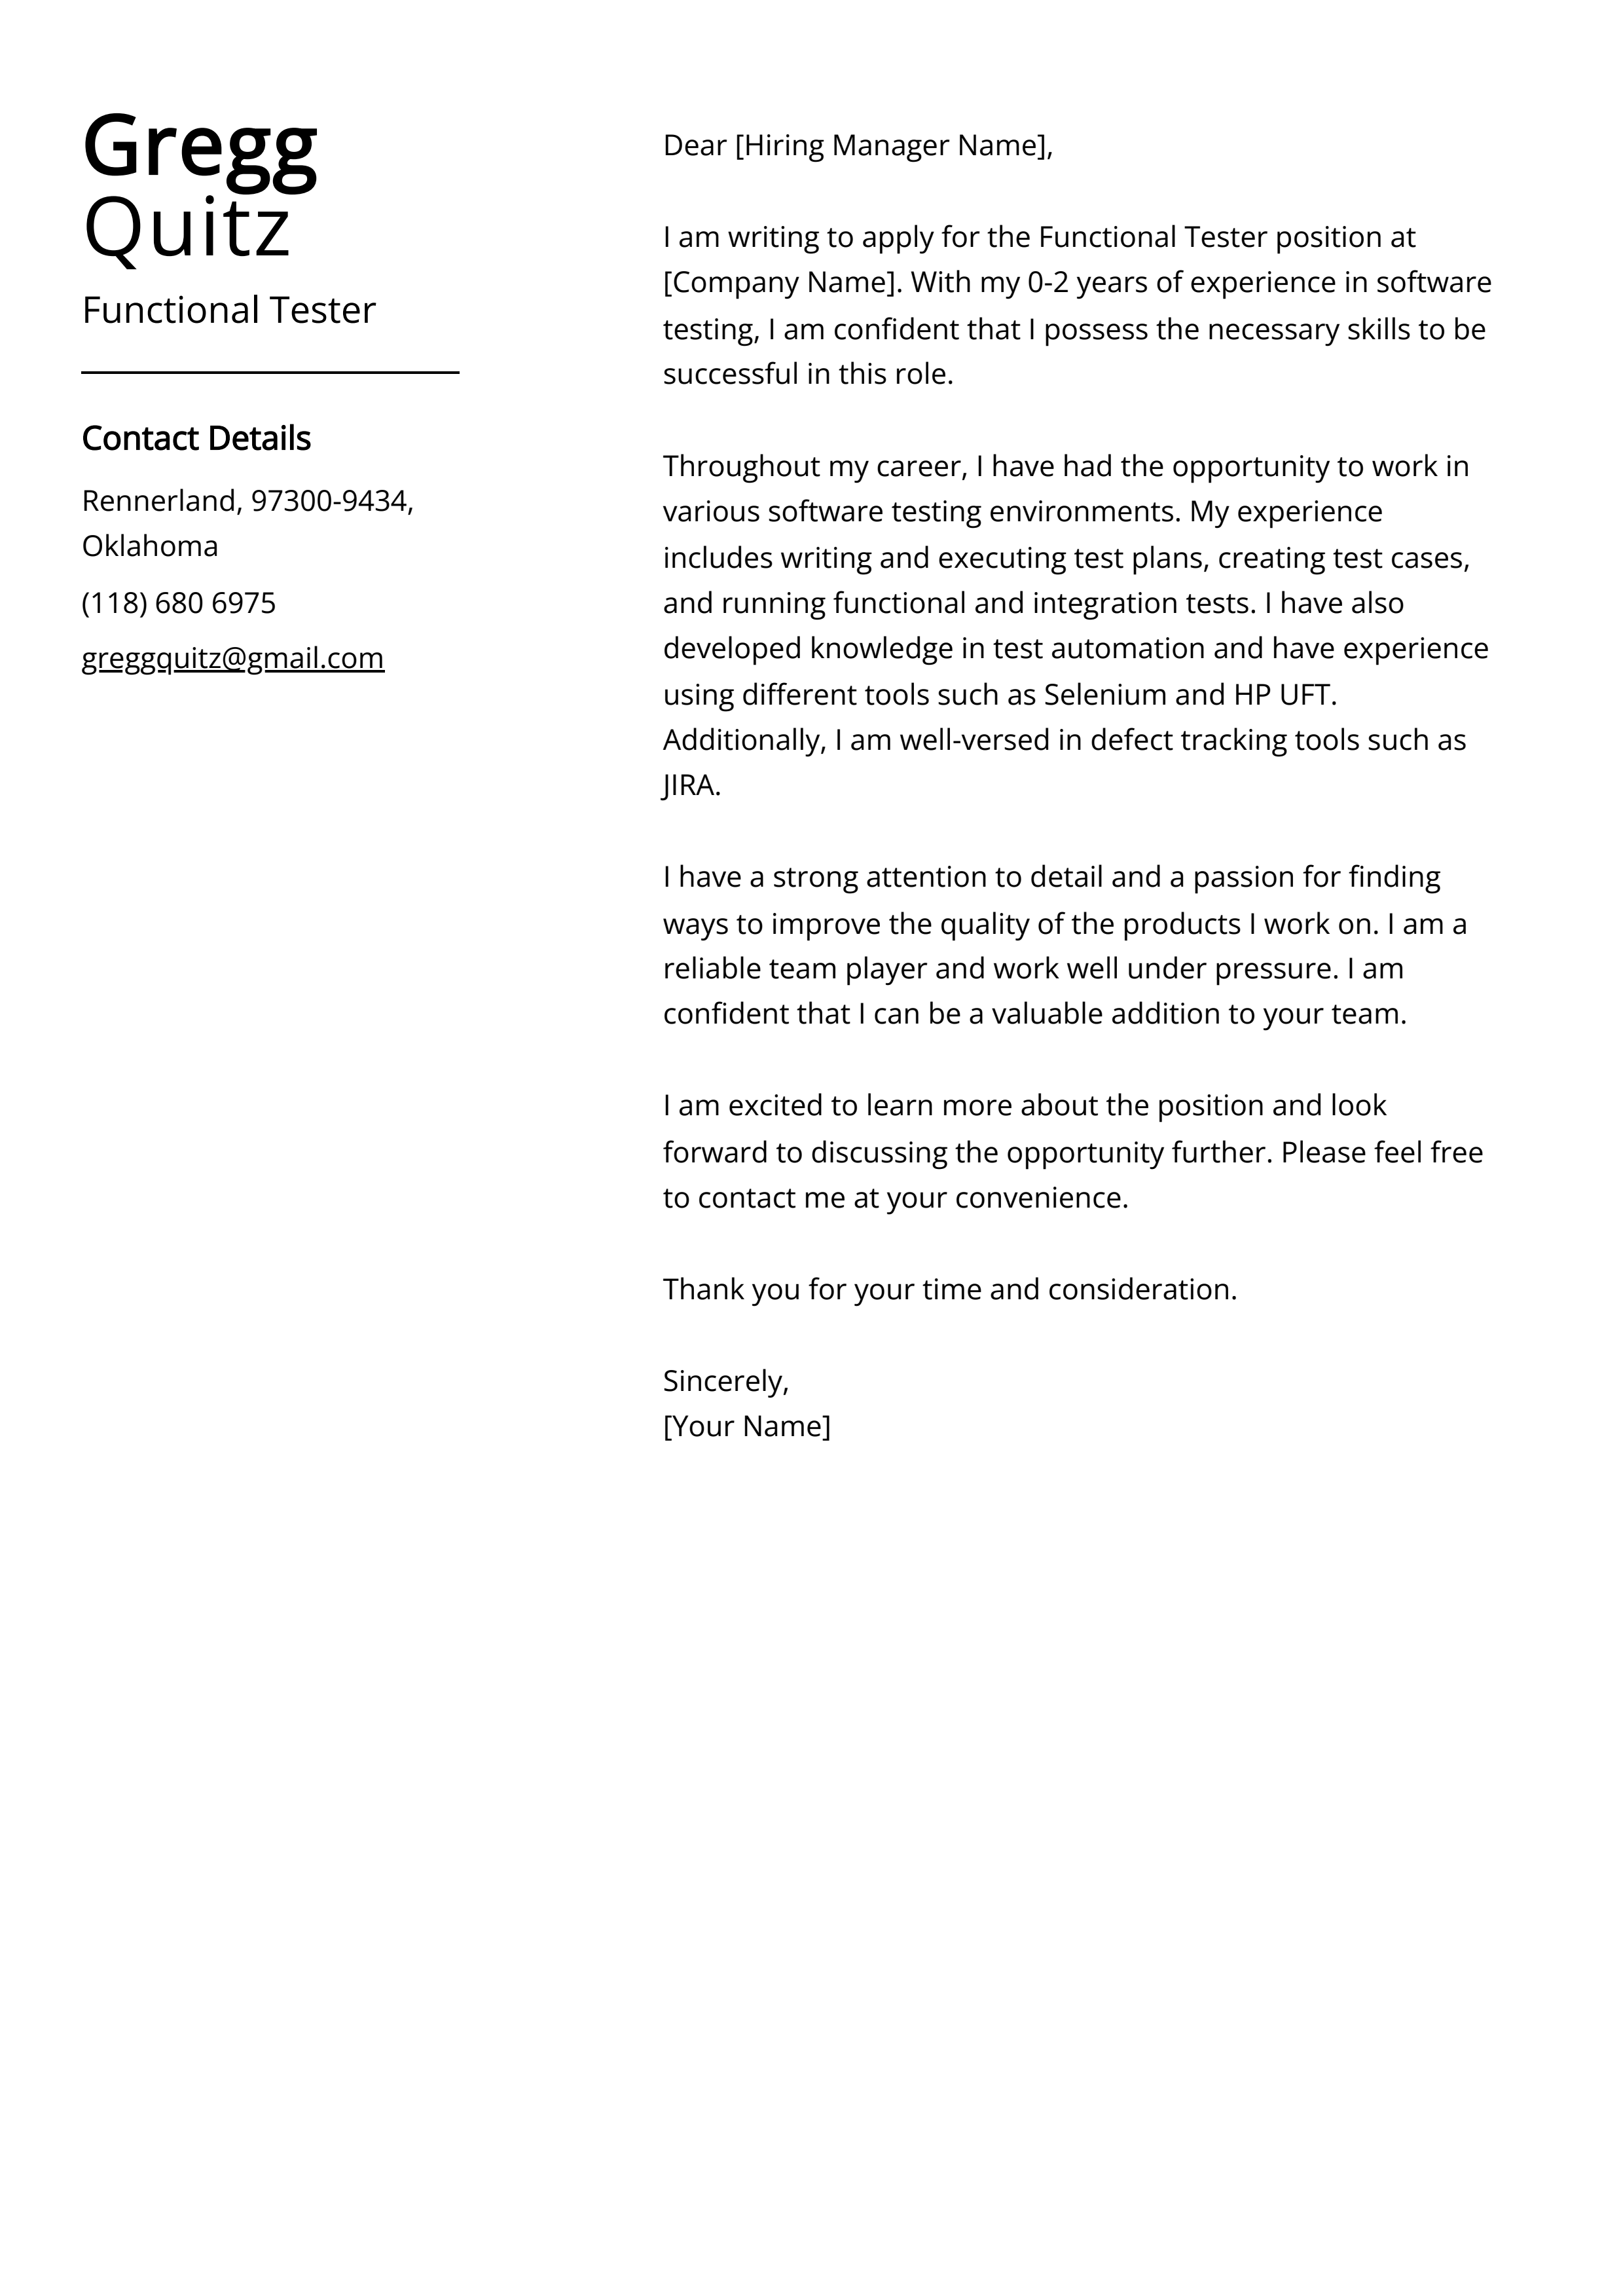 Functional Tester Cover Letter Example